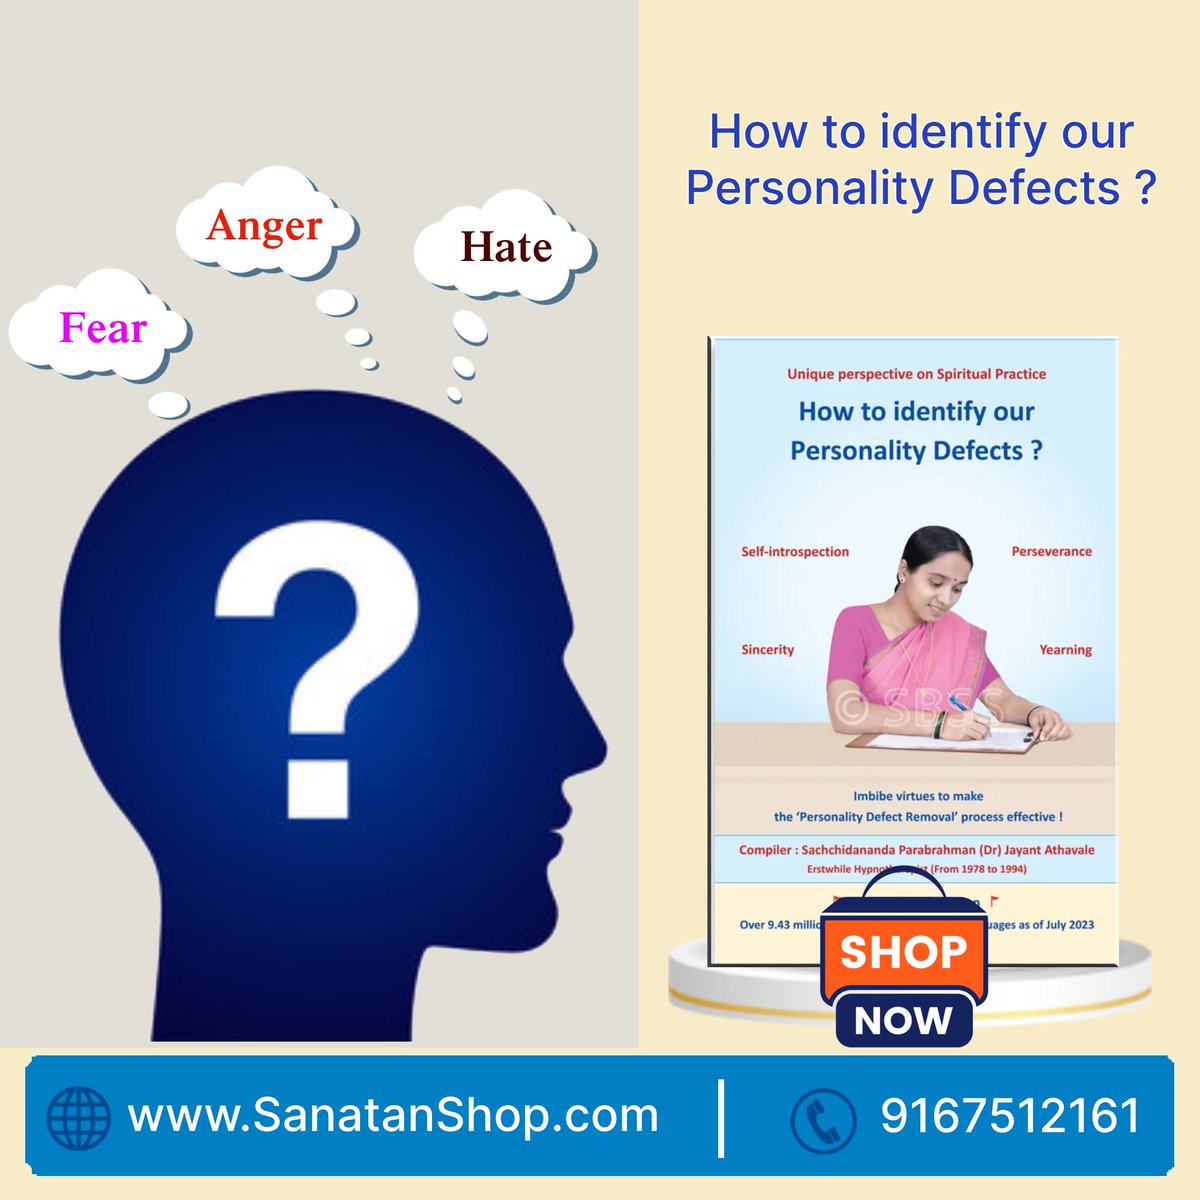 #FridayMotivation While studying our own mind, finding the qualities & personality defects (PDs) that form a part of our character is important. This Text elucidates on the methods used in the PDR process to identify our qualities & PDs. Buy Now @ sanatanshop.com/shop/english-b…